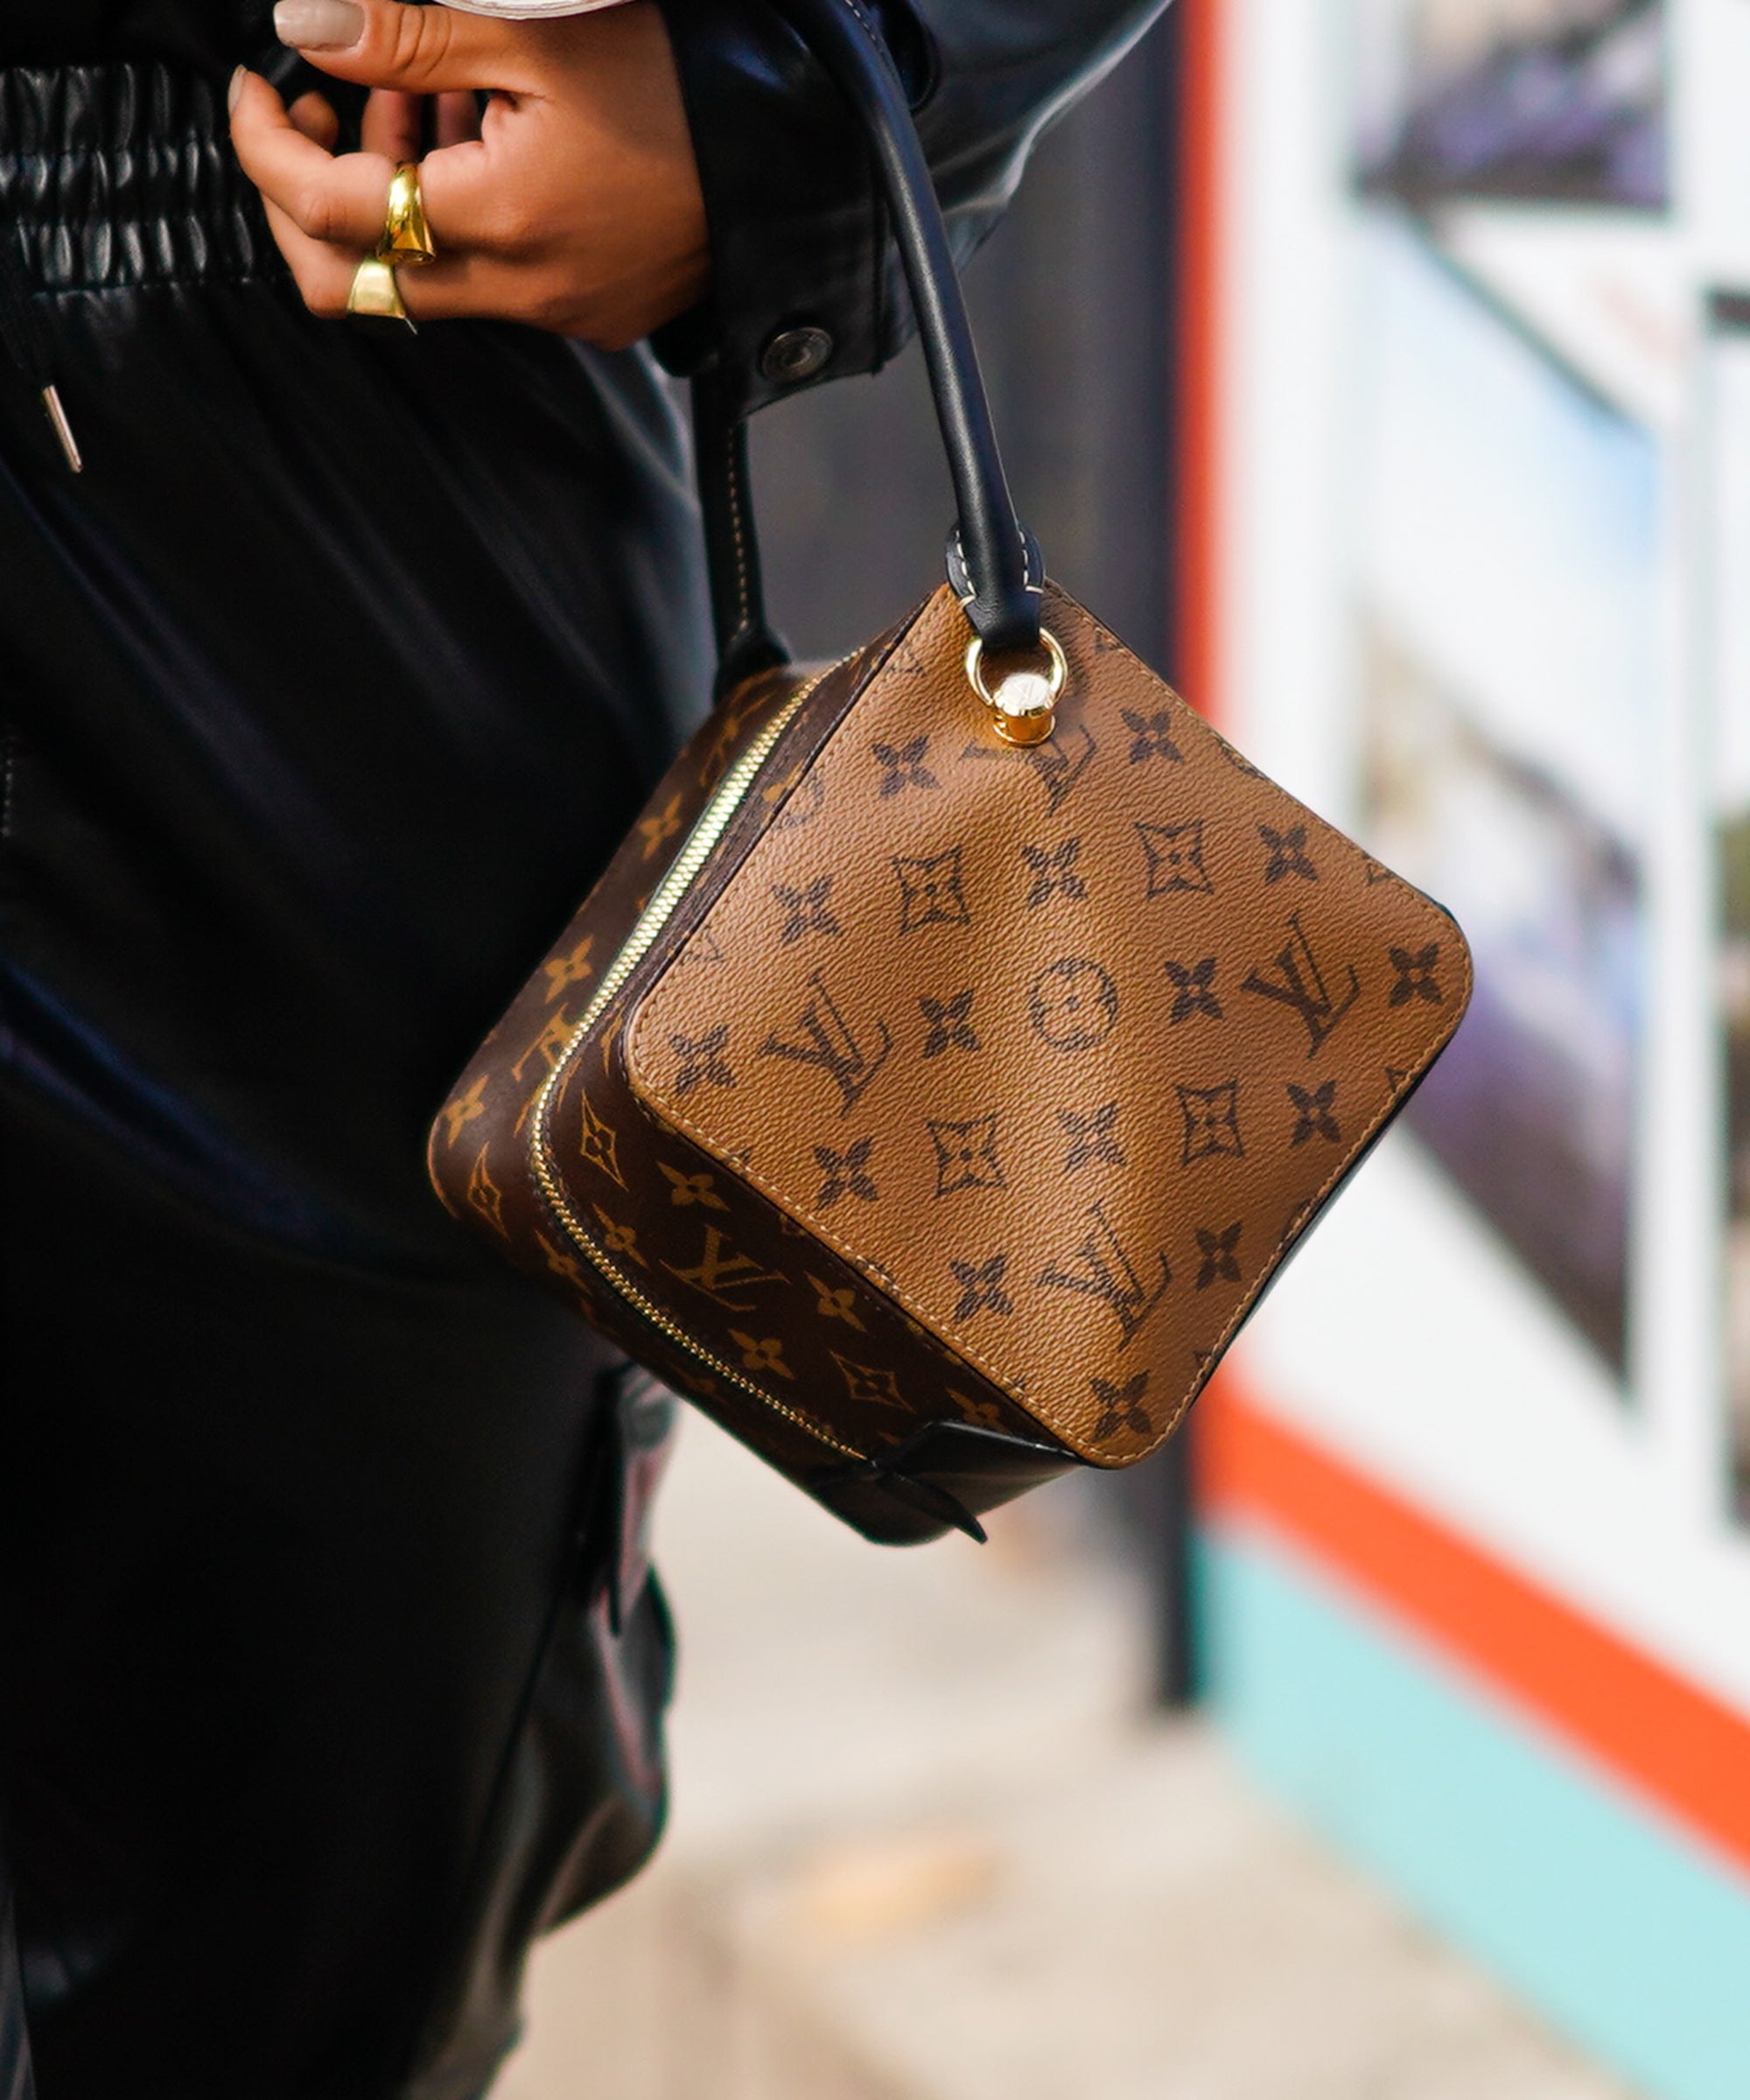 Donald Trump Welcomed Louis Vuitton To Texas